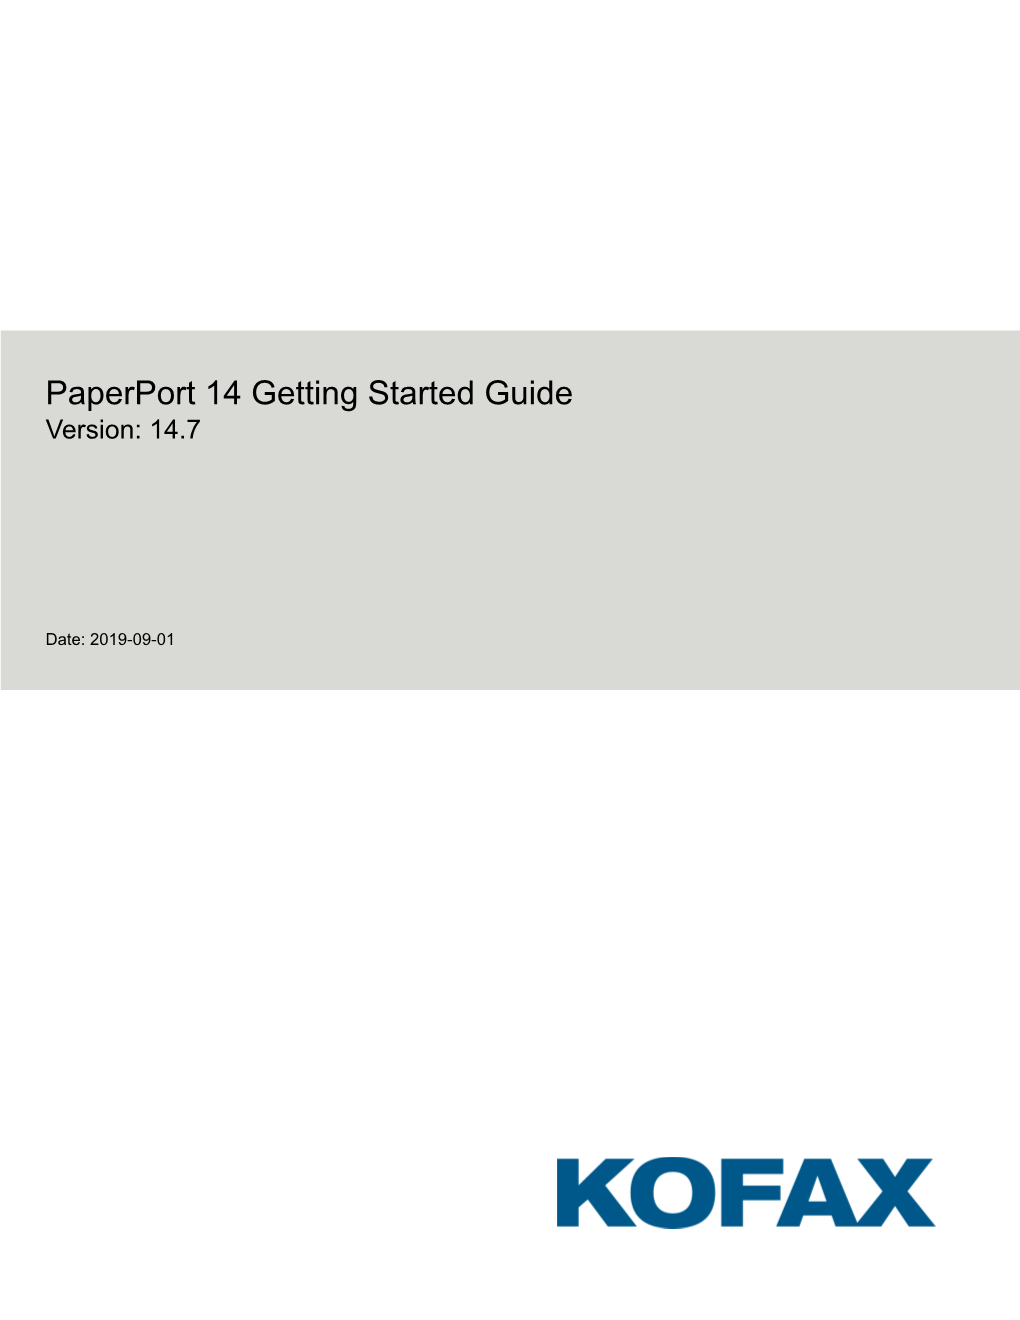 Paperport 14 Getting Started Guide Version: 14.7